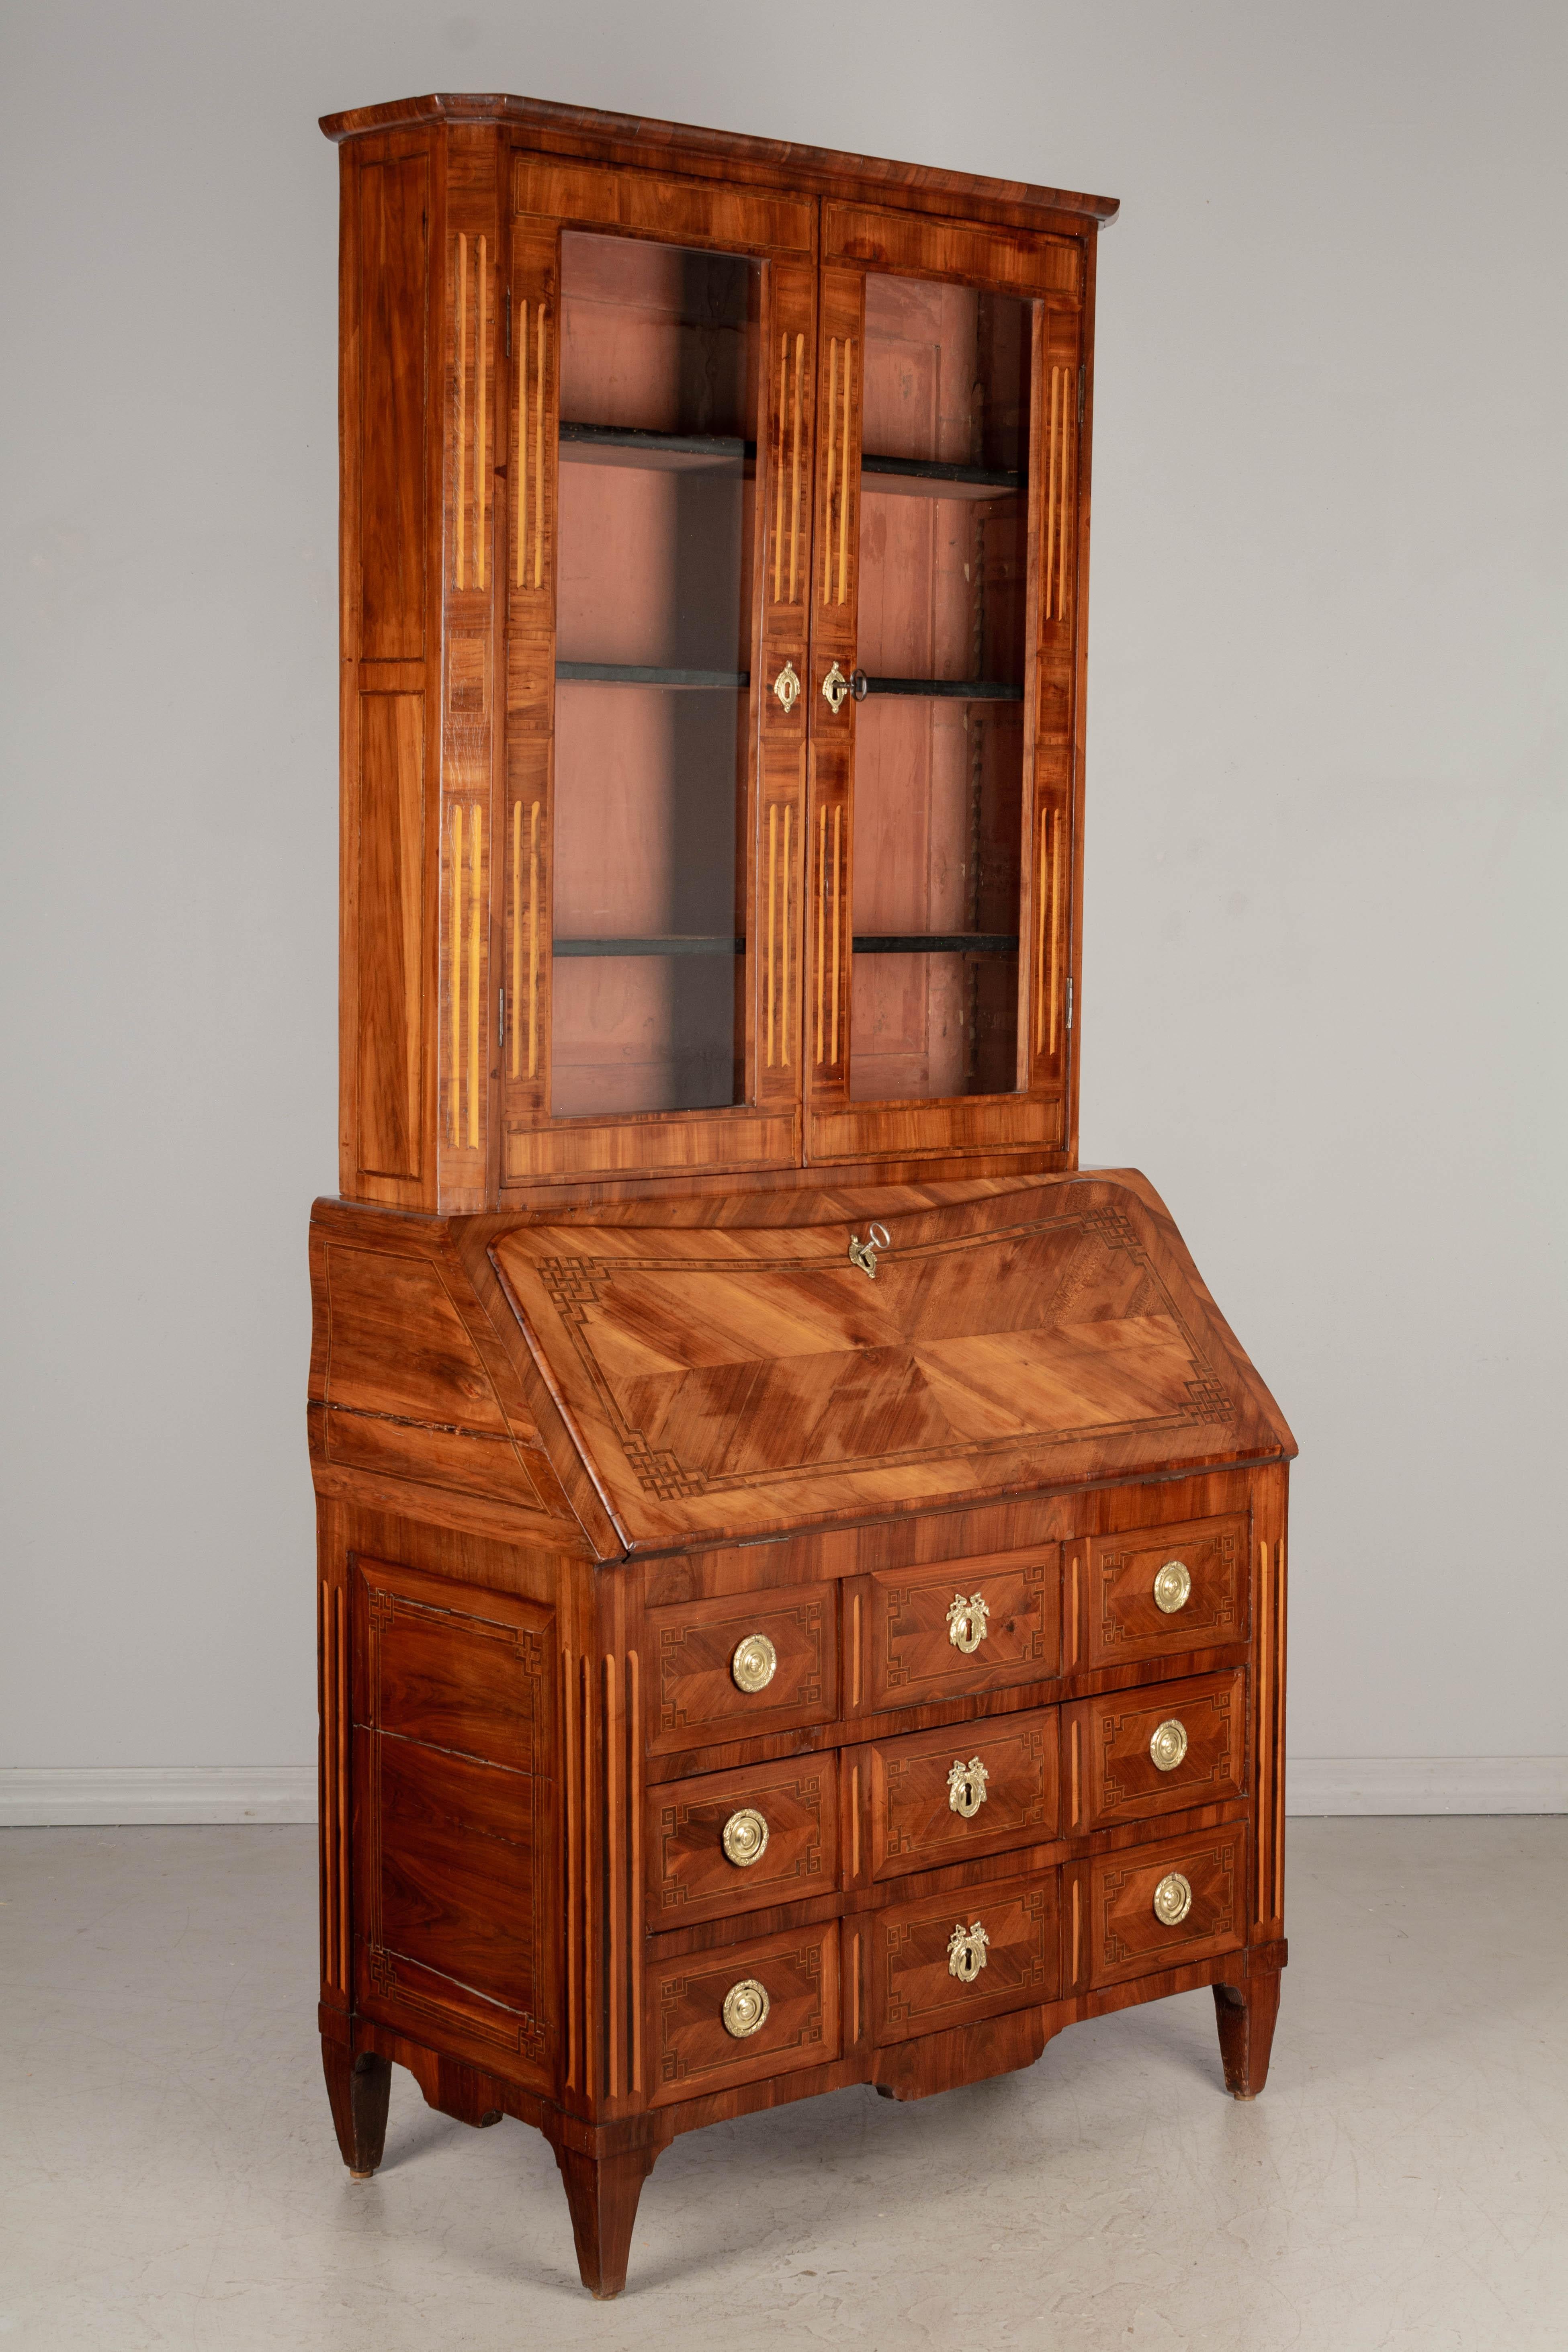 An 18th century French Louis XVI marquetry secretaire, or secretary desk with bookcase. Beautifully made with book matched veneer of mahogany and fine inlay of walnut and mahogany. In two parts, the top bookcase has the original glass paned doors